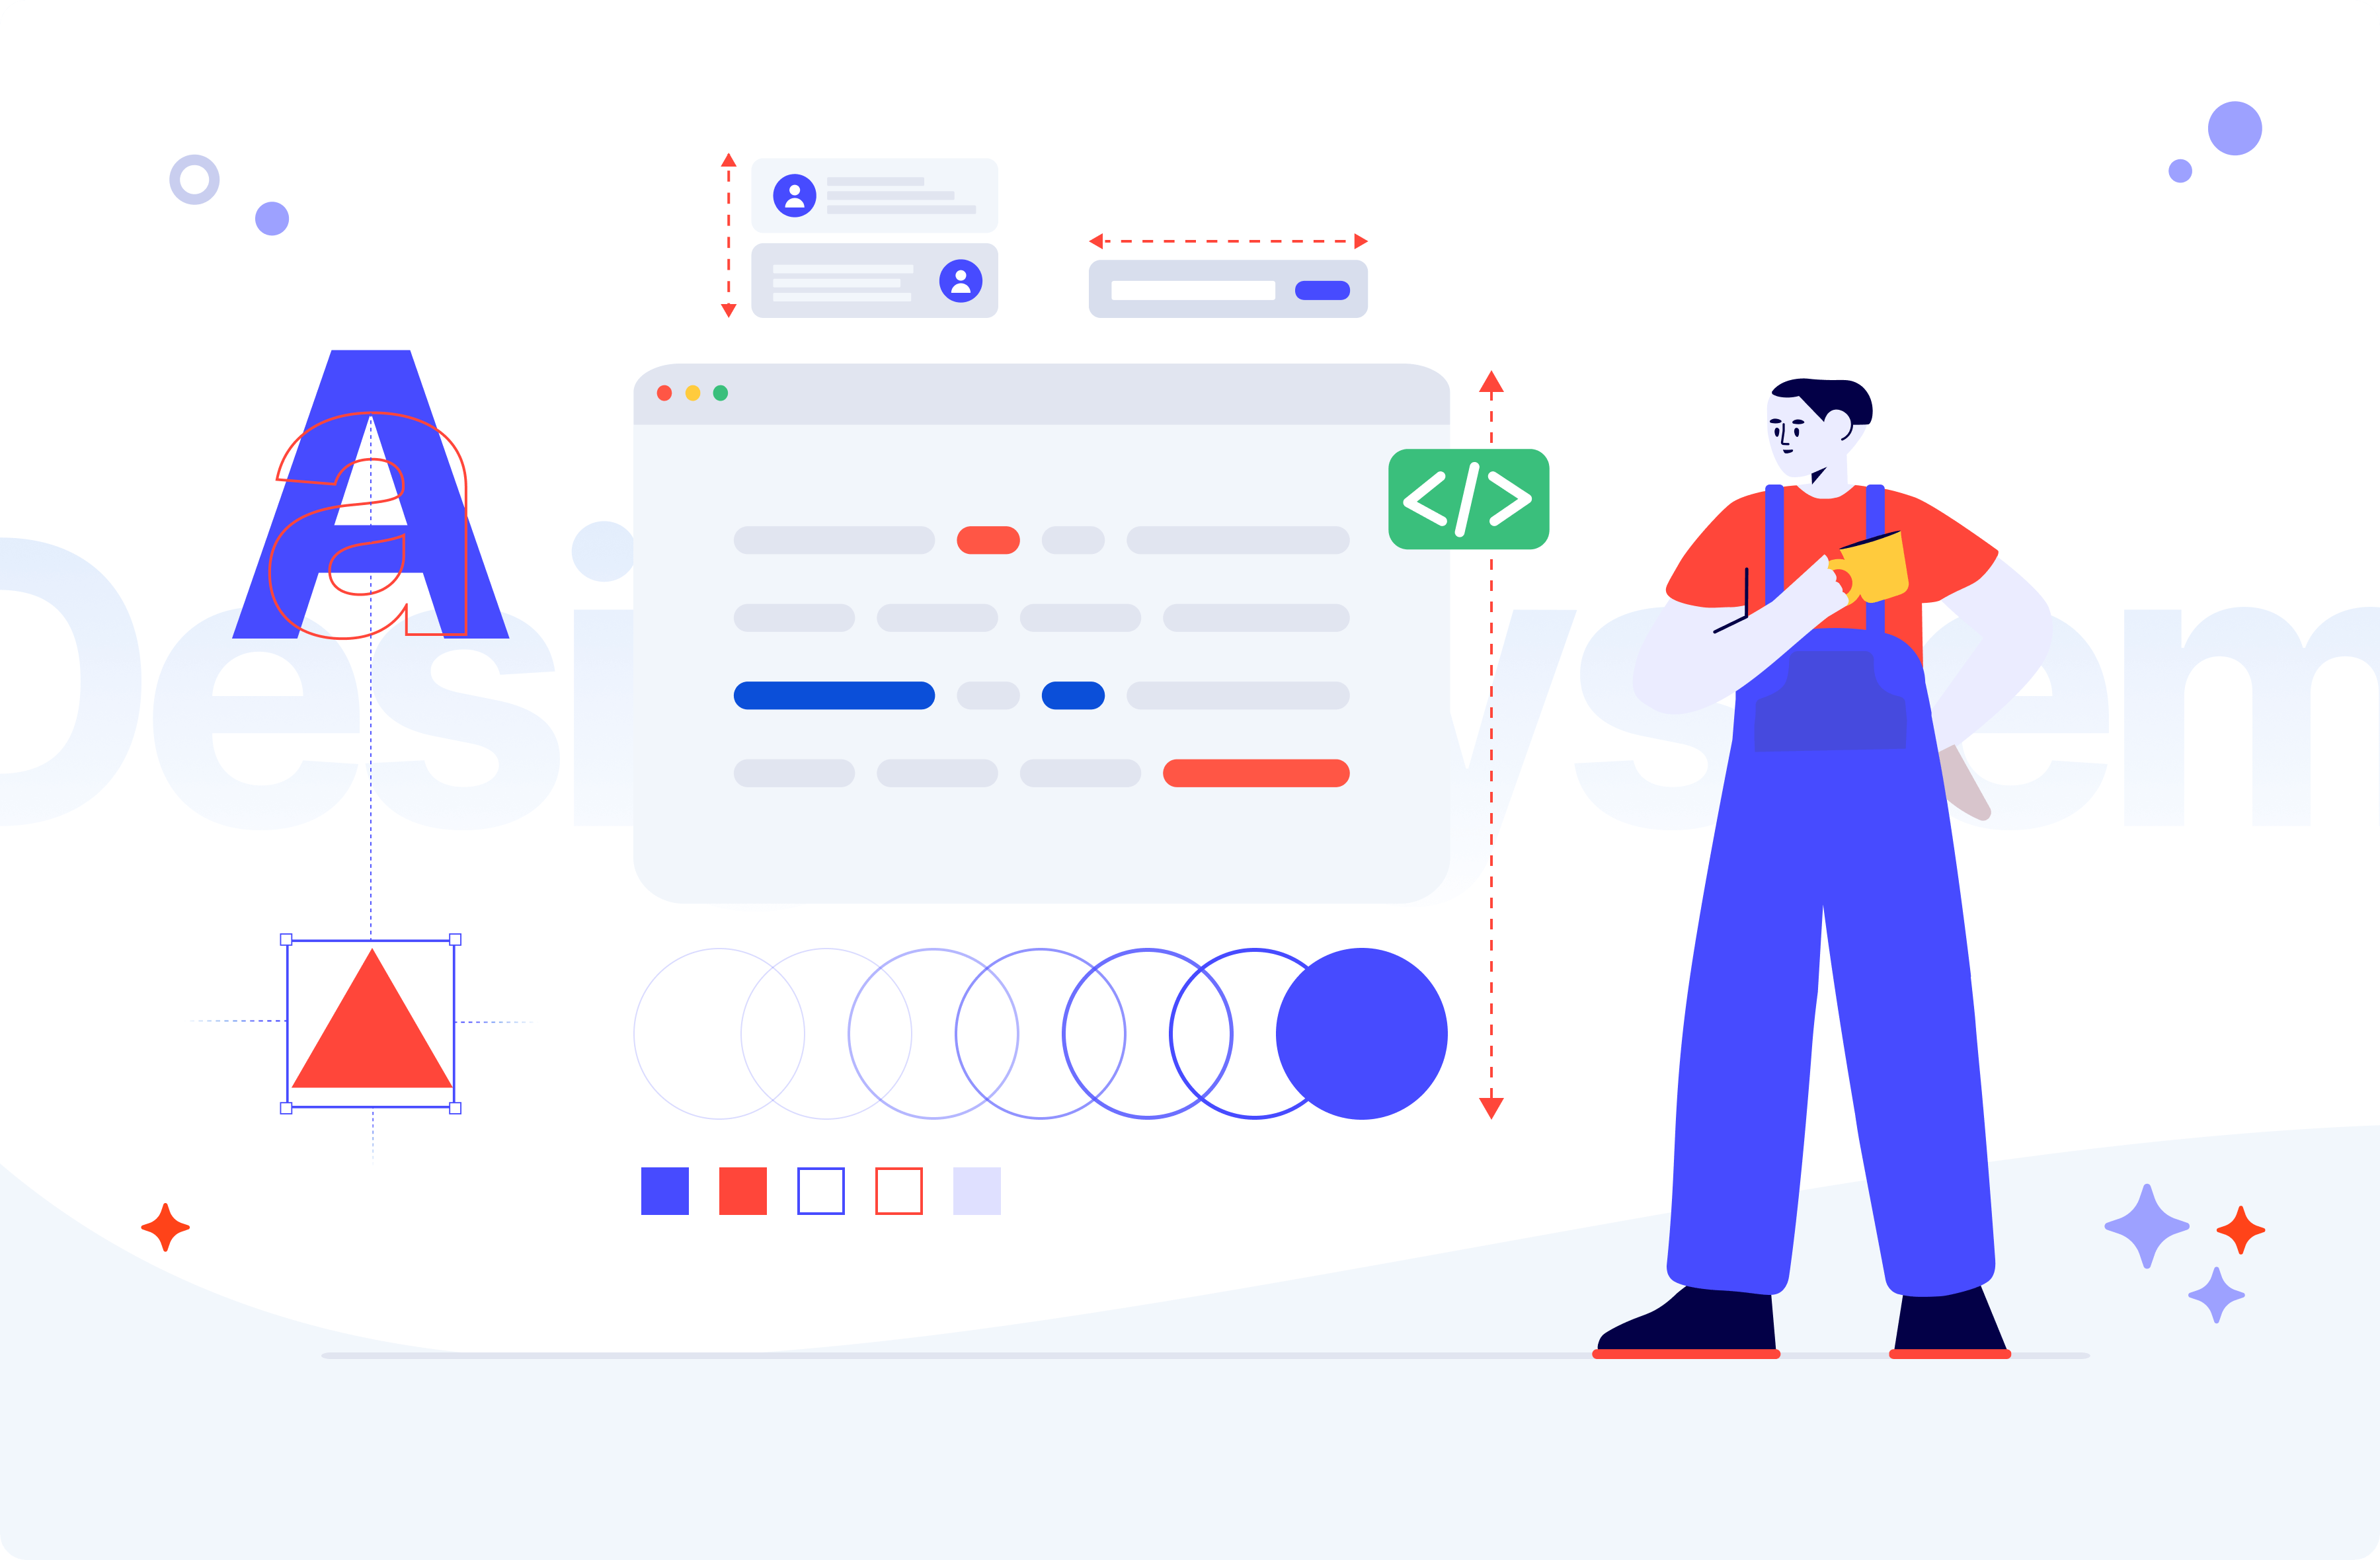 Pros and cons of having a design system